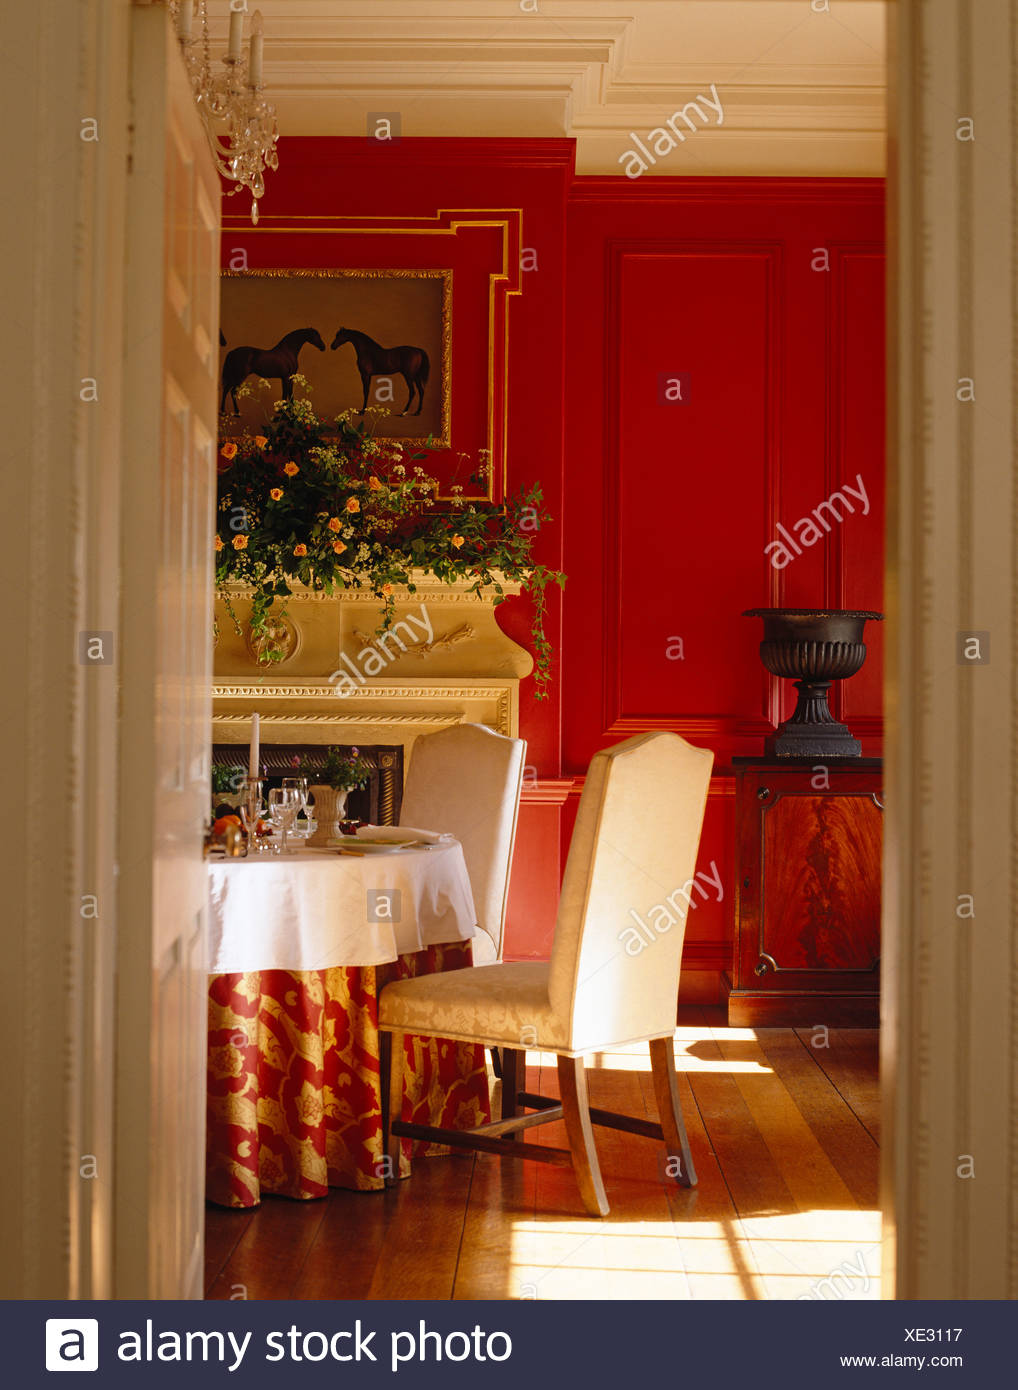 Chair Fireplace Floral High Resolution Stock Photography And Images Alamy